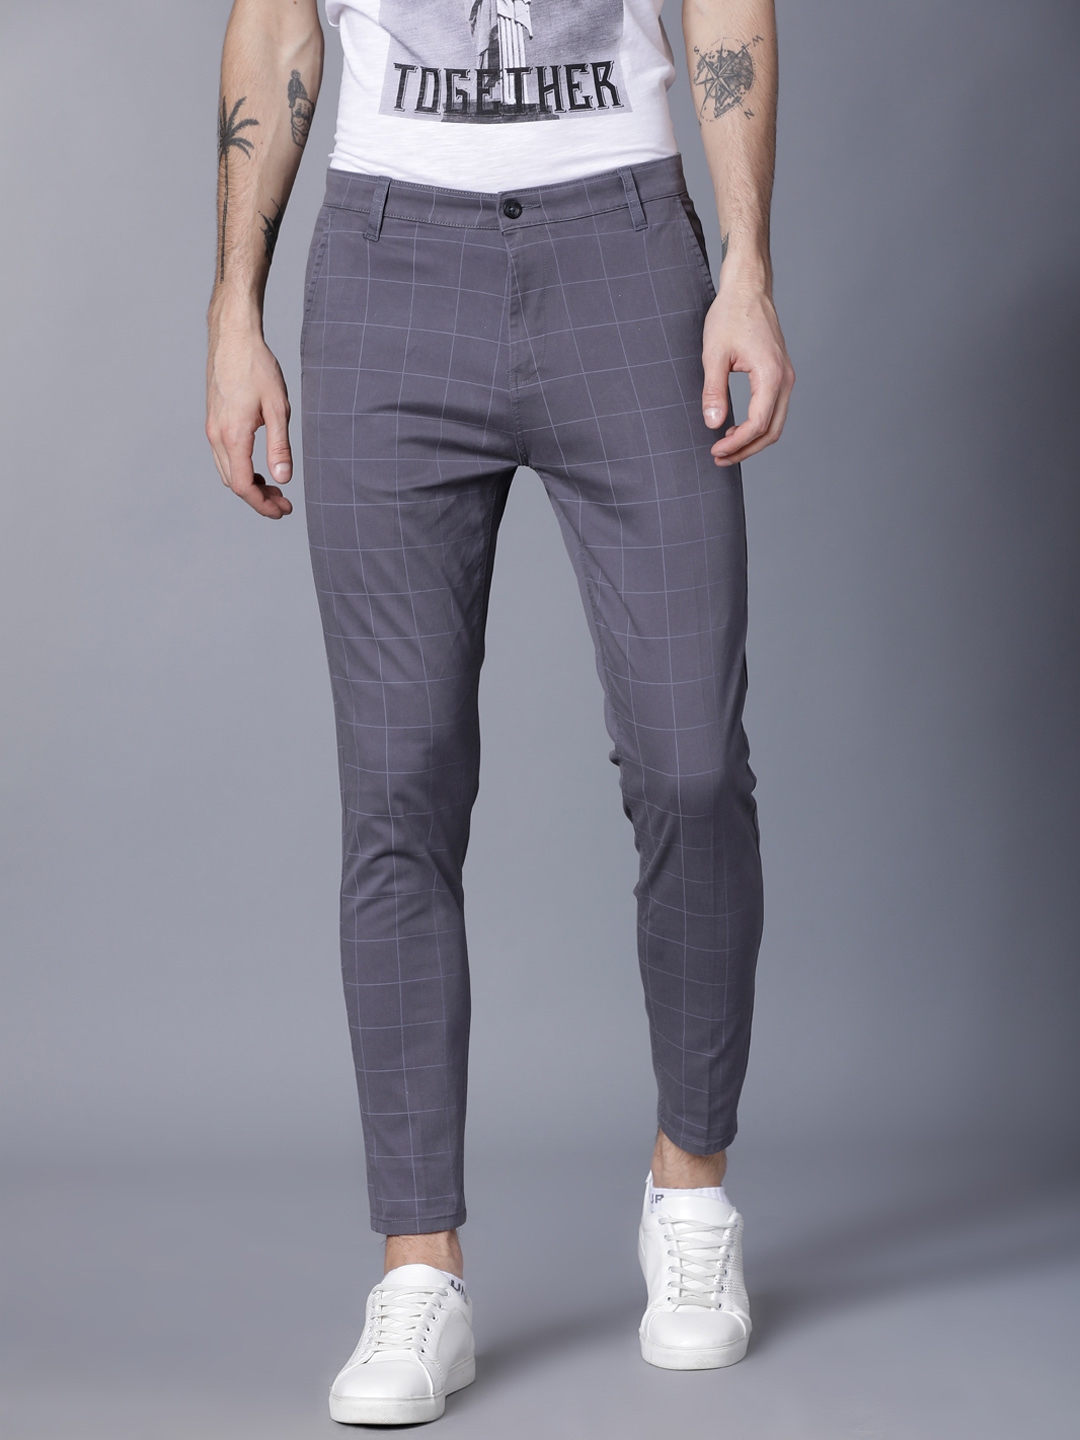 Source Drop Shipping Fashion Style Grey Checked Pants Men Check Trousers on  malibabacom